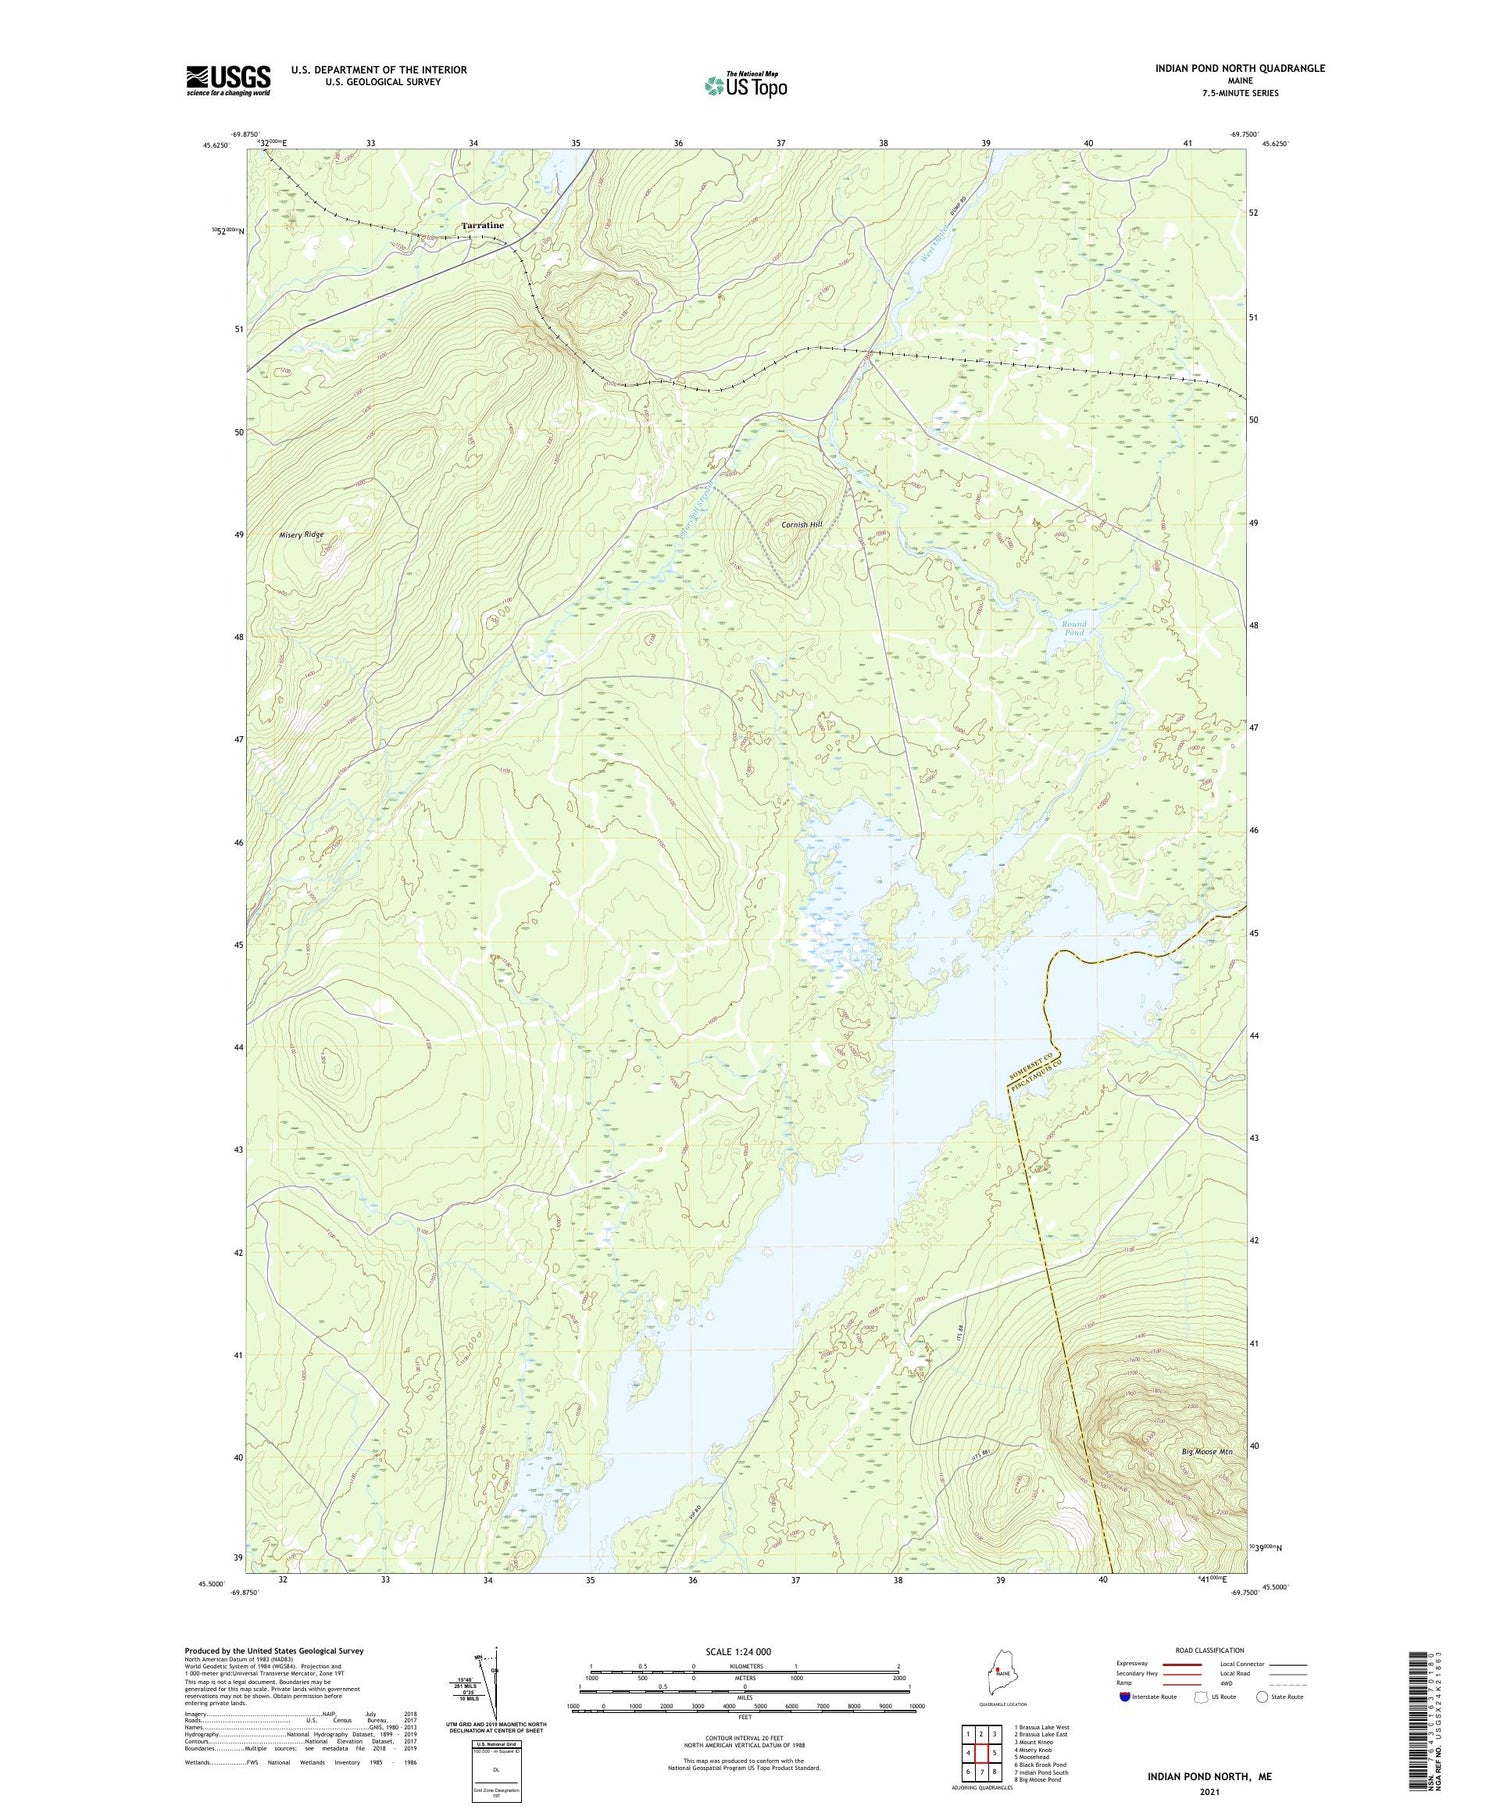 Indian Pond North Maine US Topo Map Image